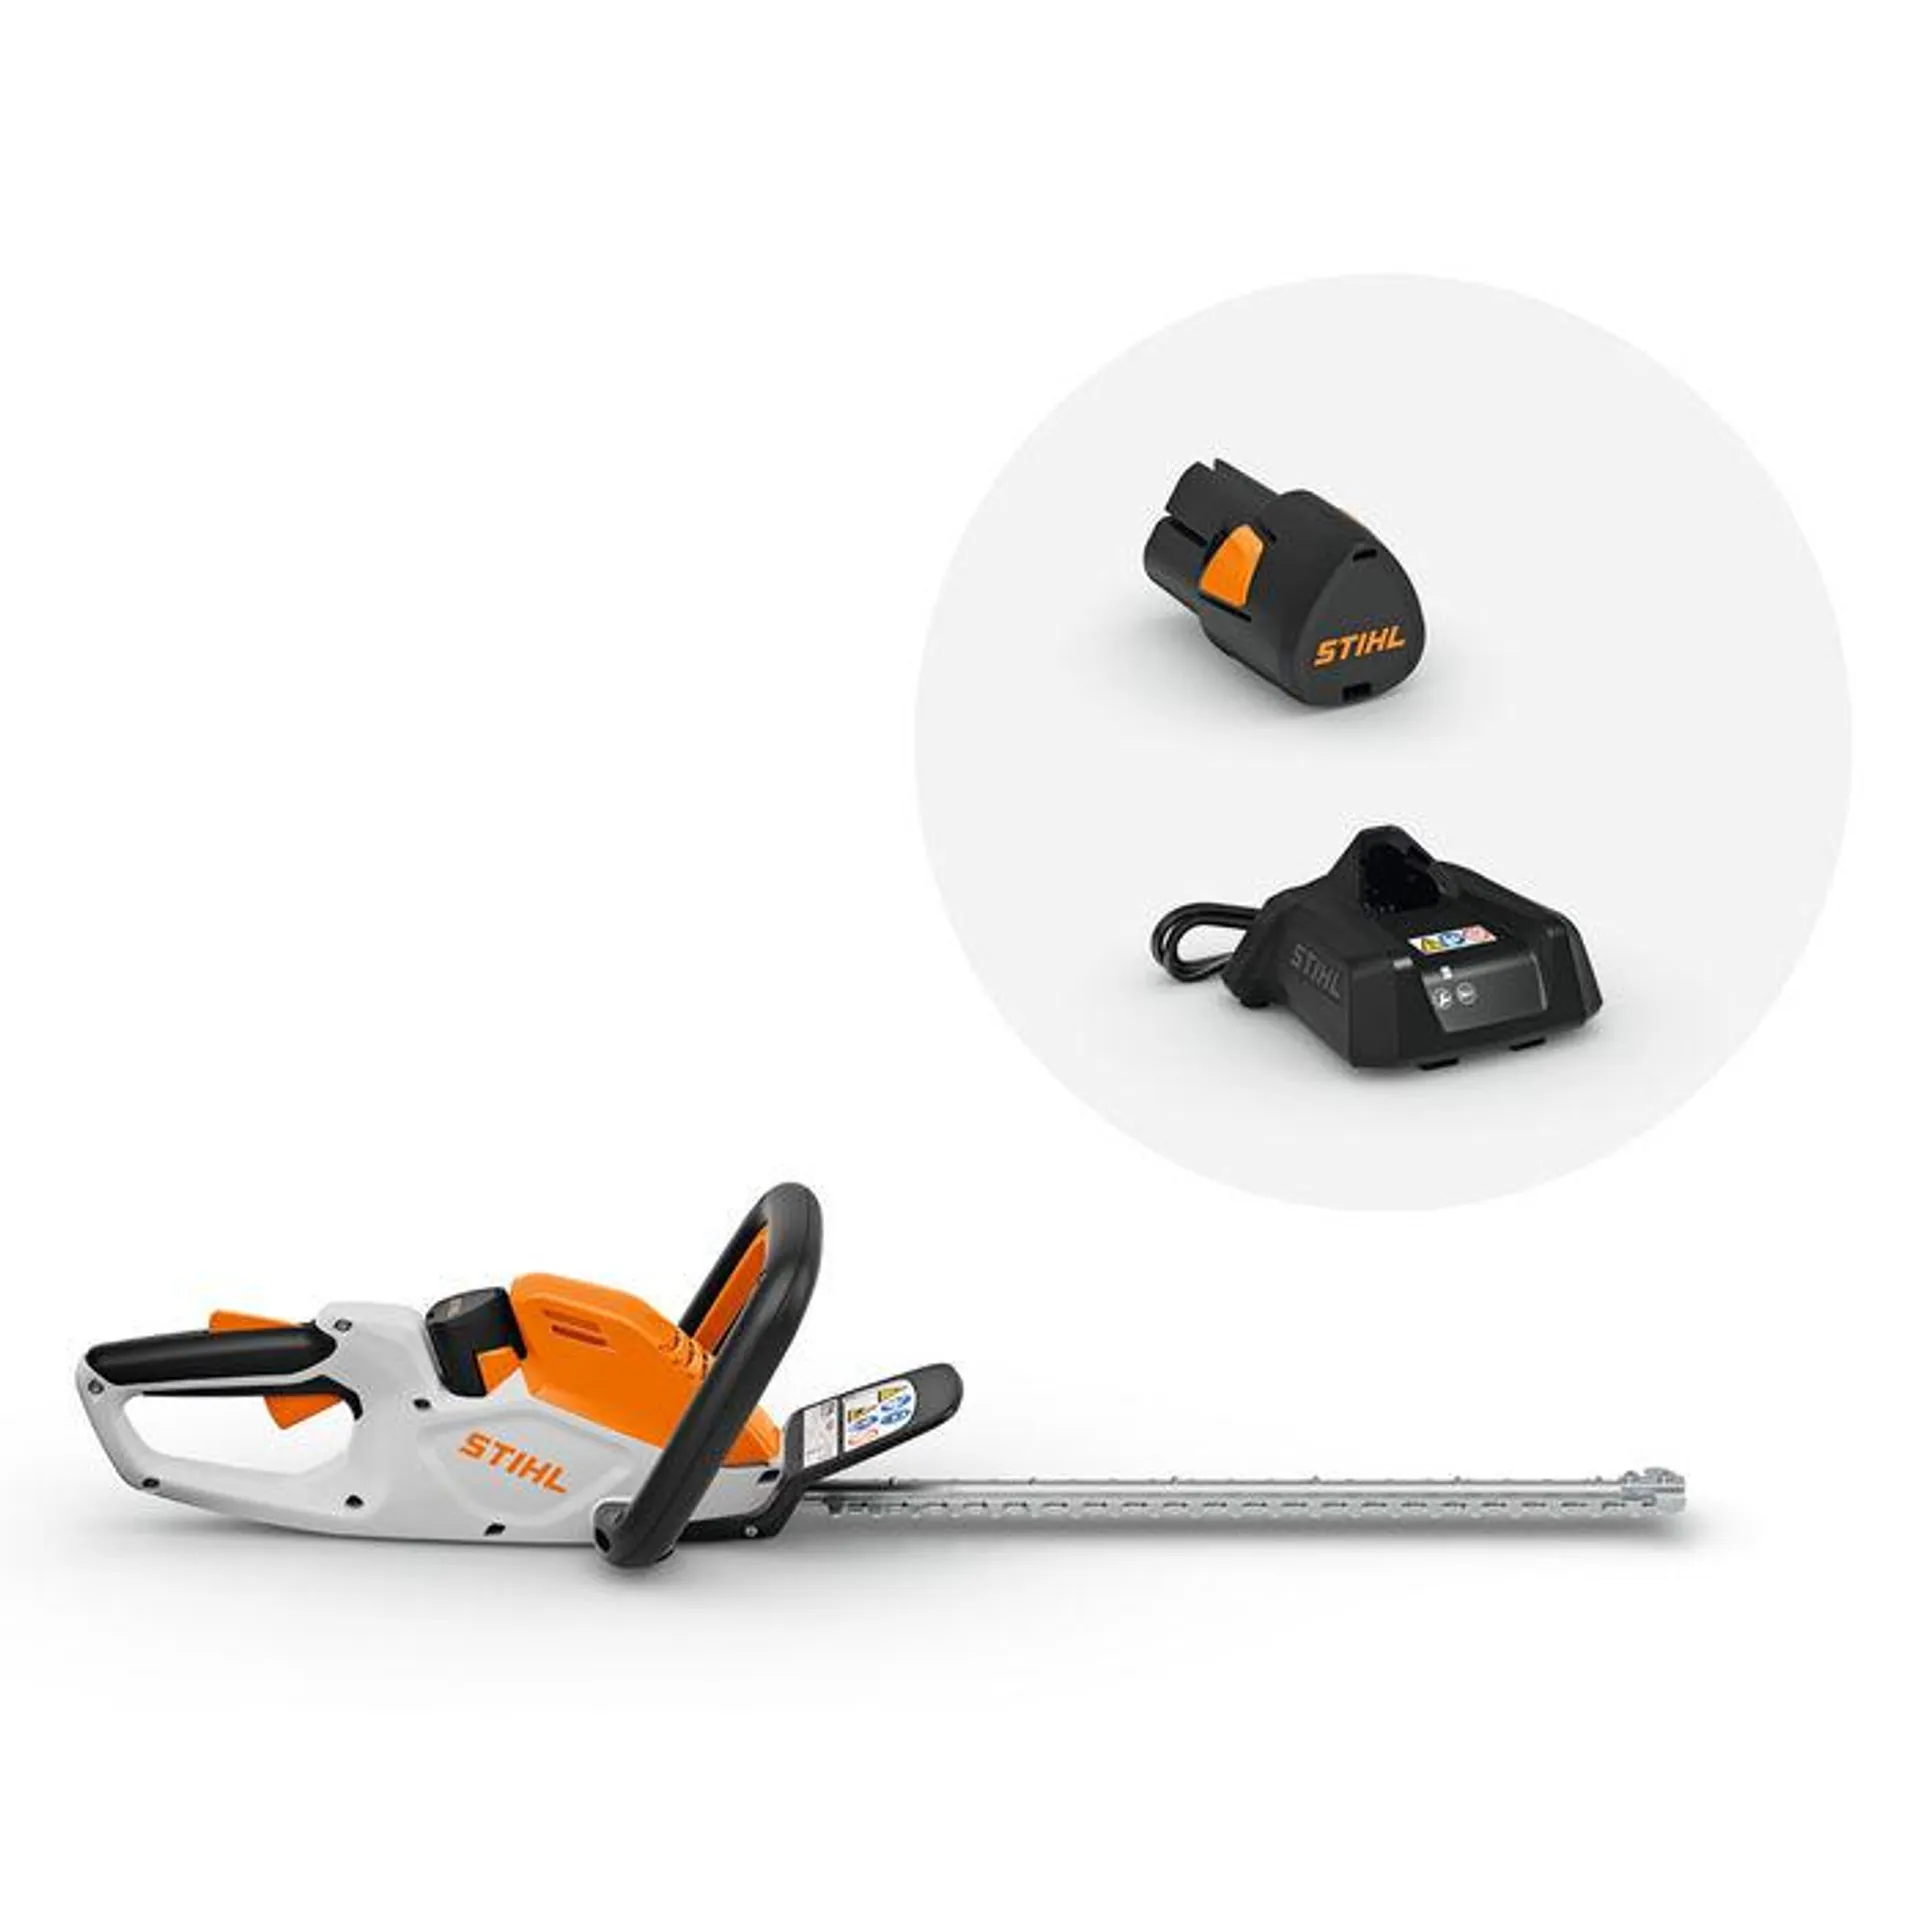 STIHL HSA 30 Battery Hedge Trimmer Kit (With Battery & Charger)